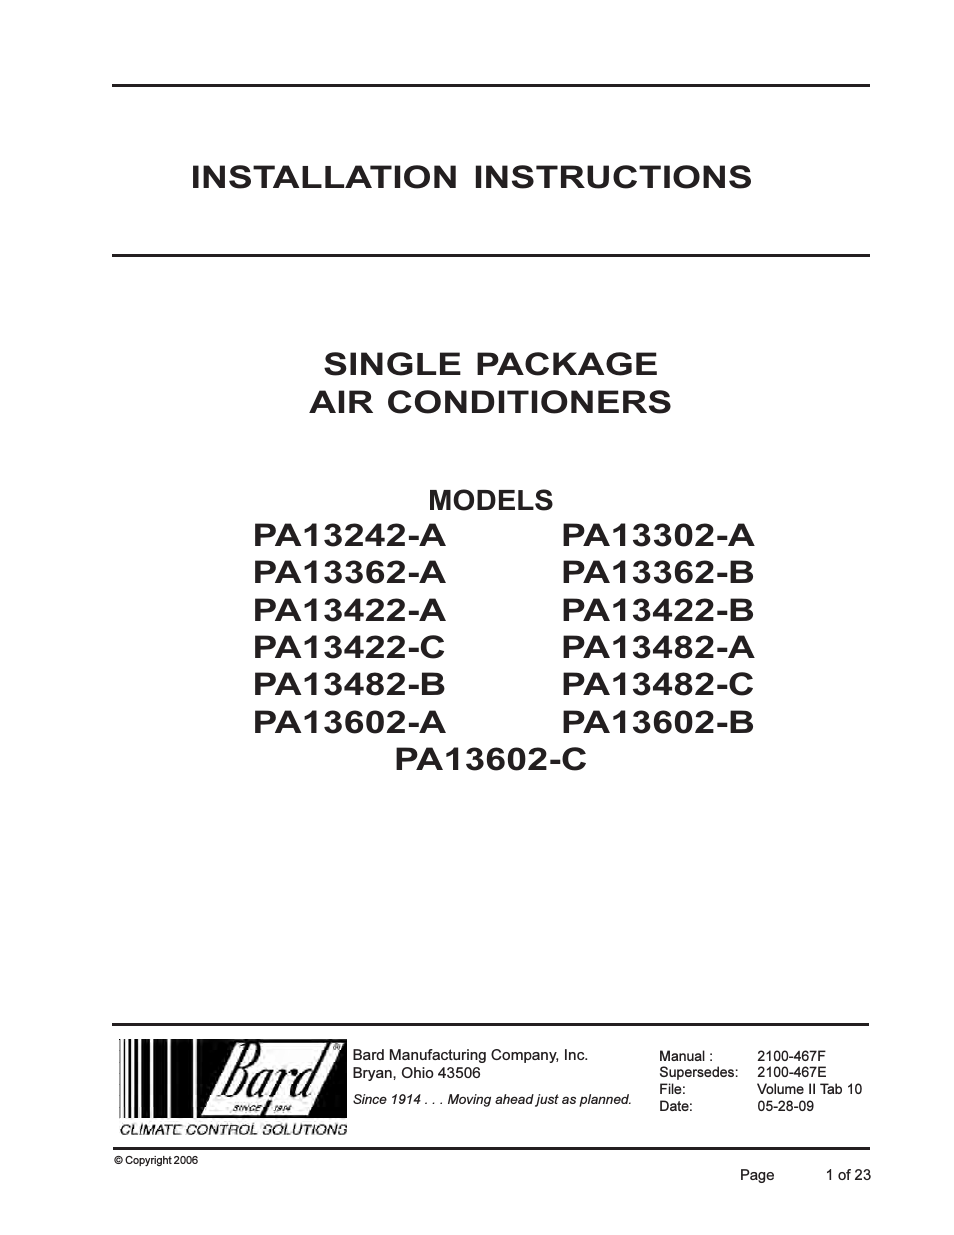 Single Package Air Conditioners PA13482-A